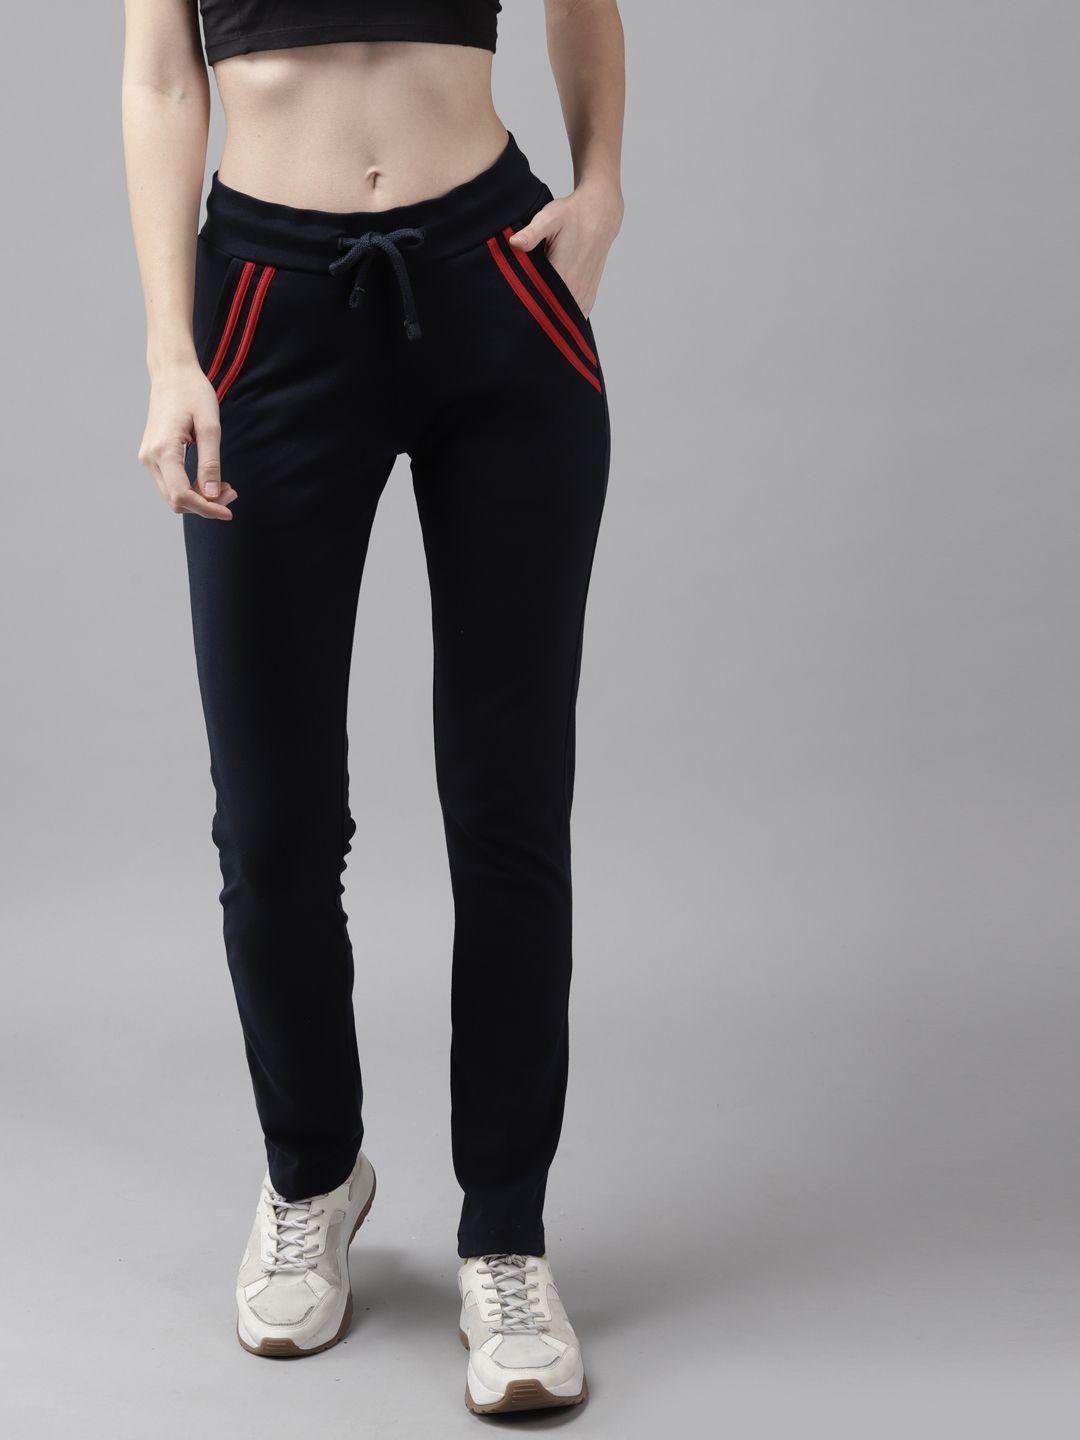 cayman-women-navy-blue-solid-cotton-track-pants